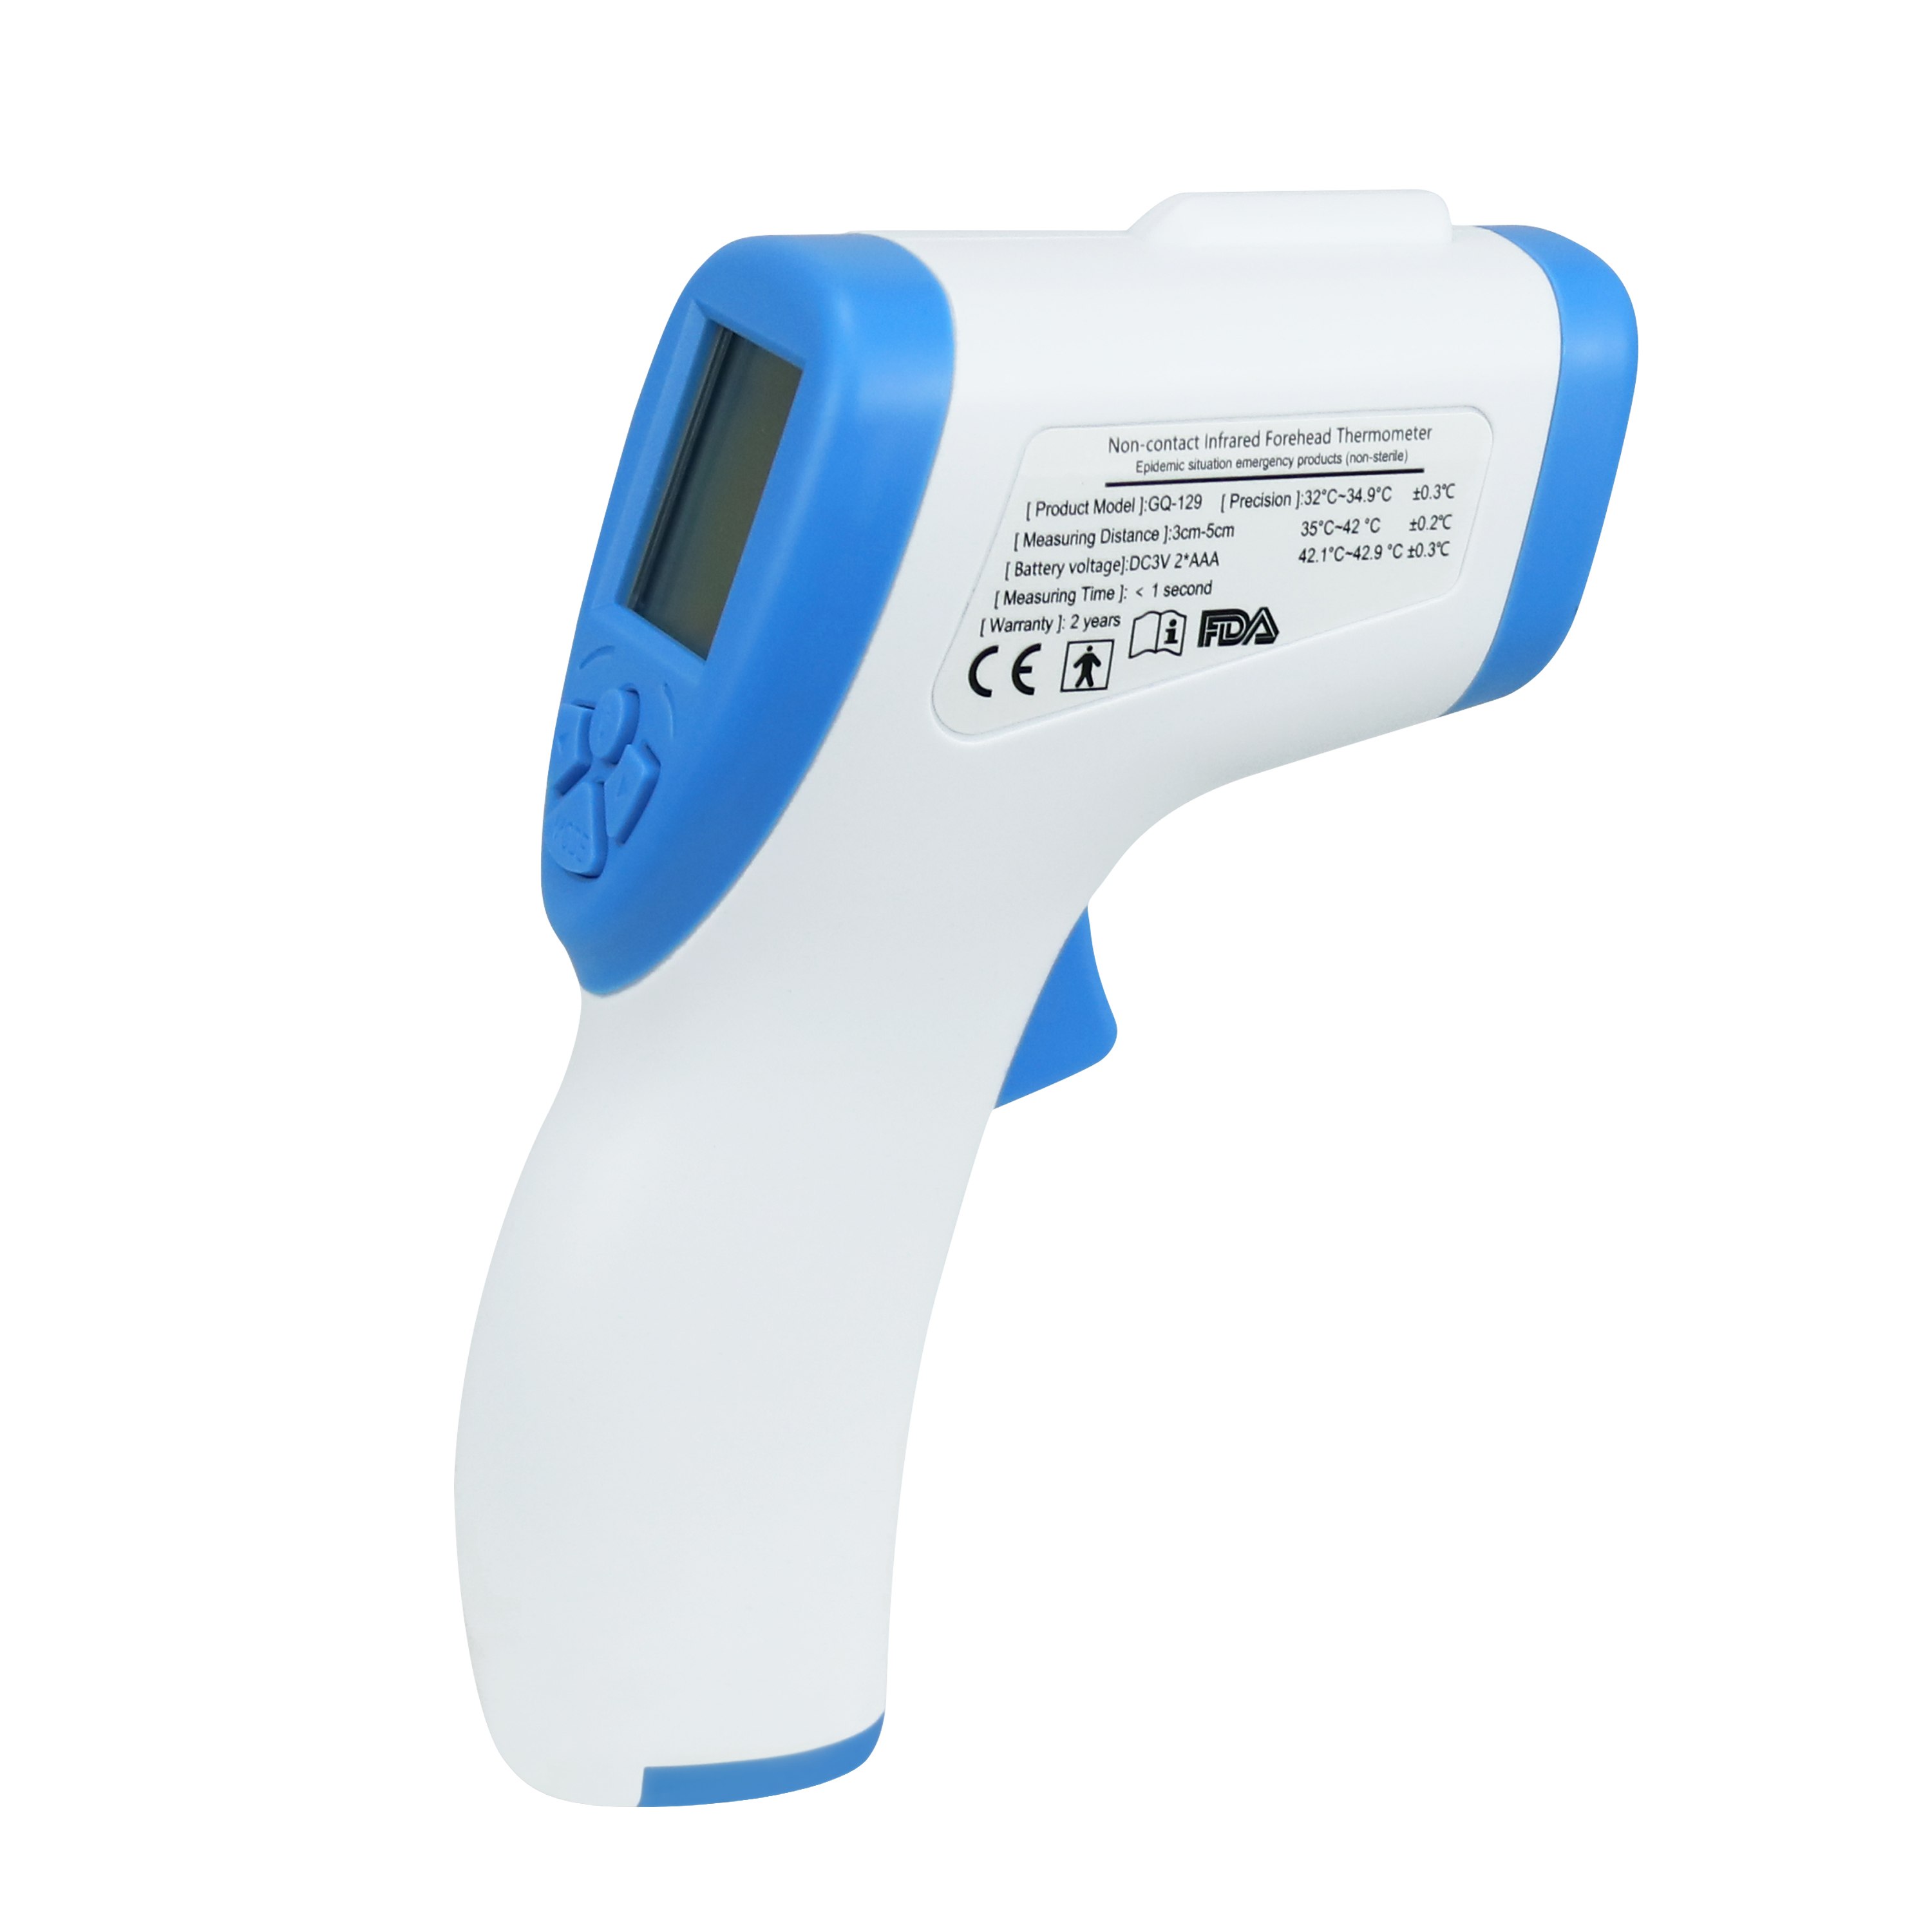 Forehead Gun Thermometer - CE FDA Approved Non Contact Baby Adult Temperature Thermometer Forehead Digital – HDV